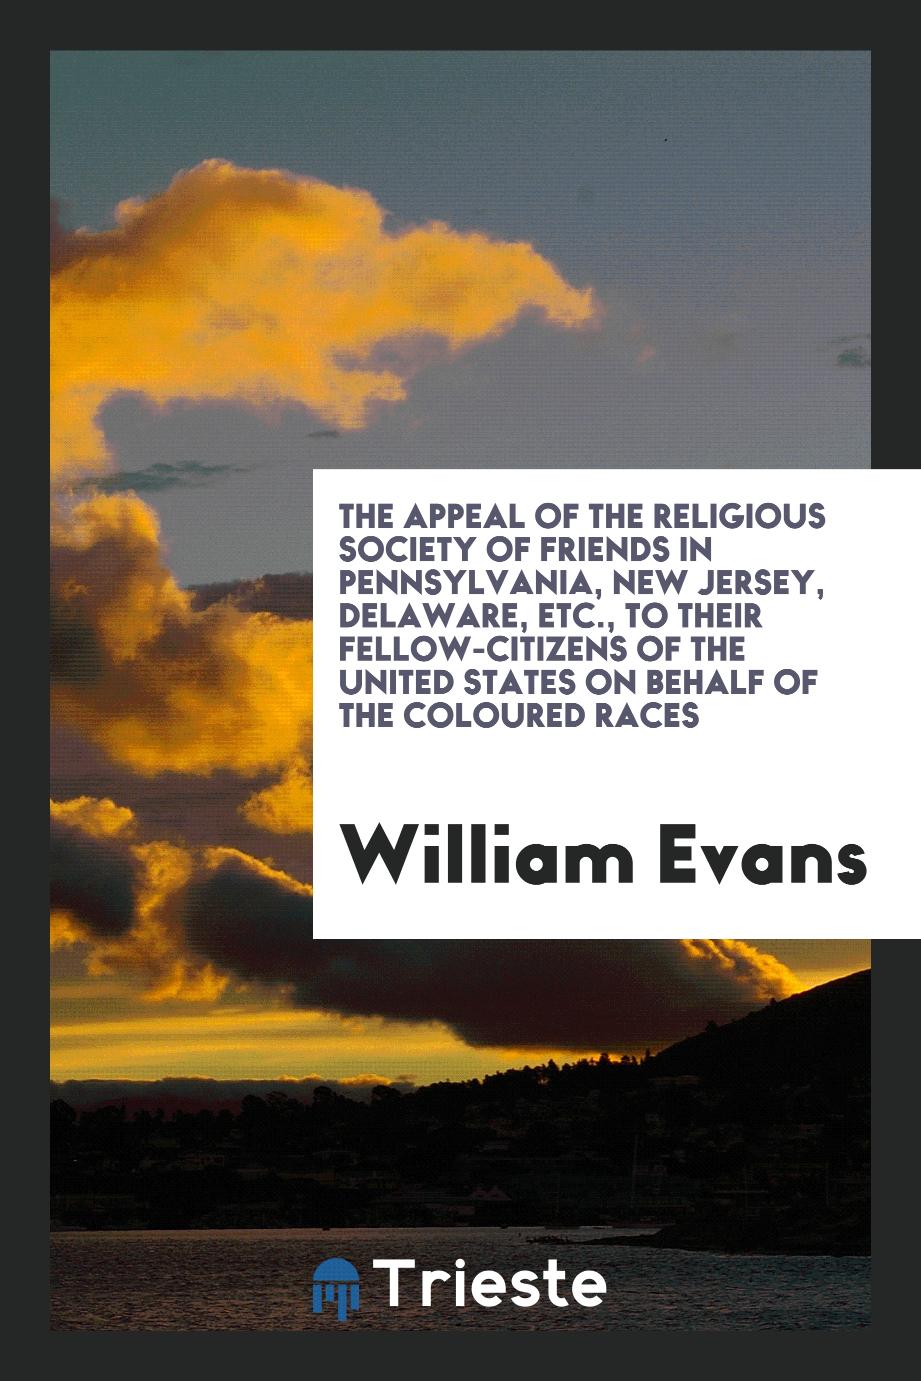 The Appeal of the Religious Society of Friends in Pennsylvania, New Jersey, Delaware, Etc., to their Fellow-Citizens of the United States on Behalf of the Coloured Races